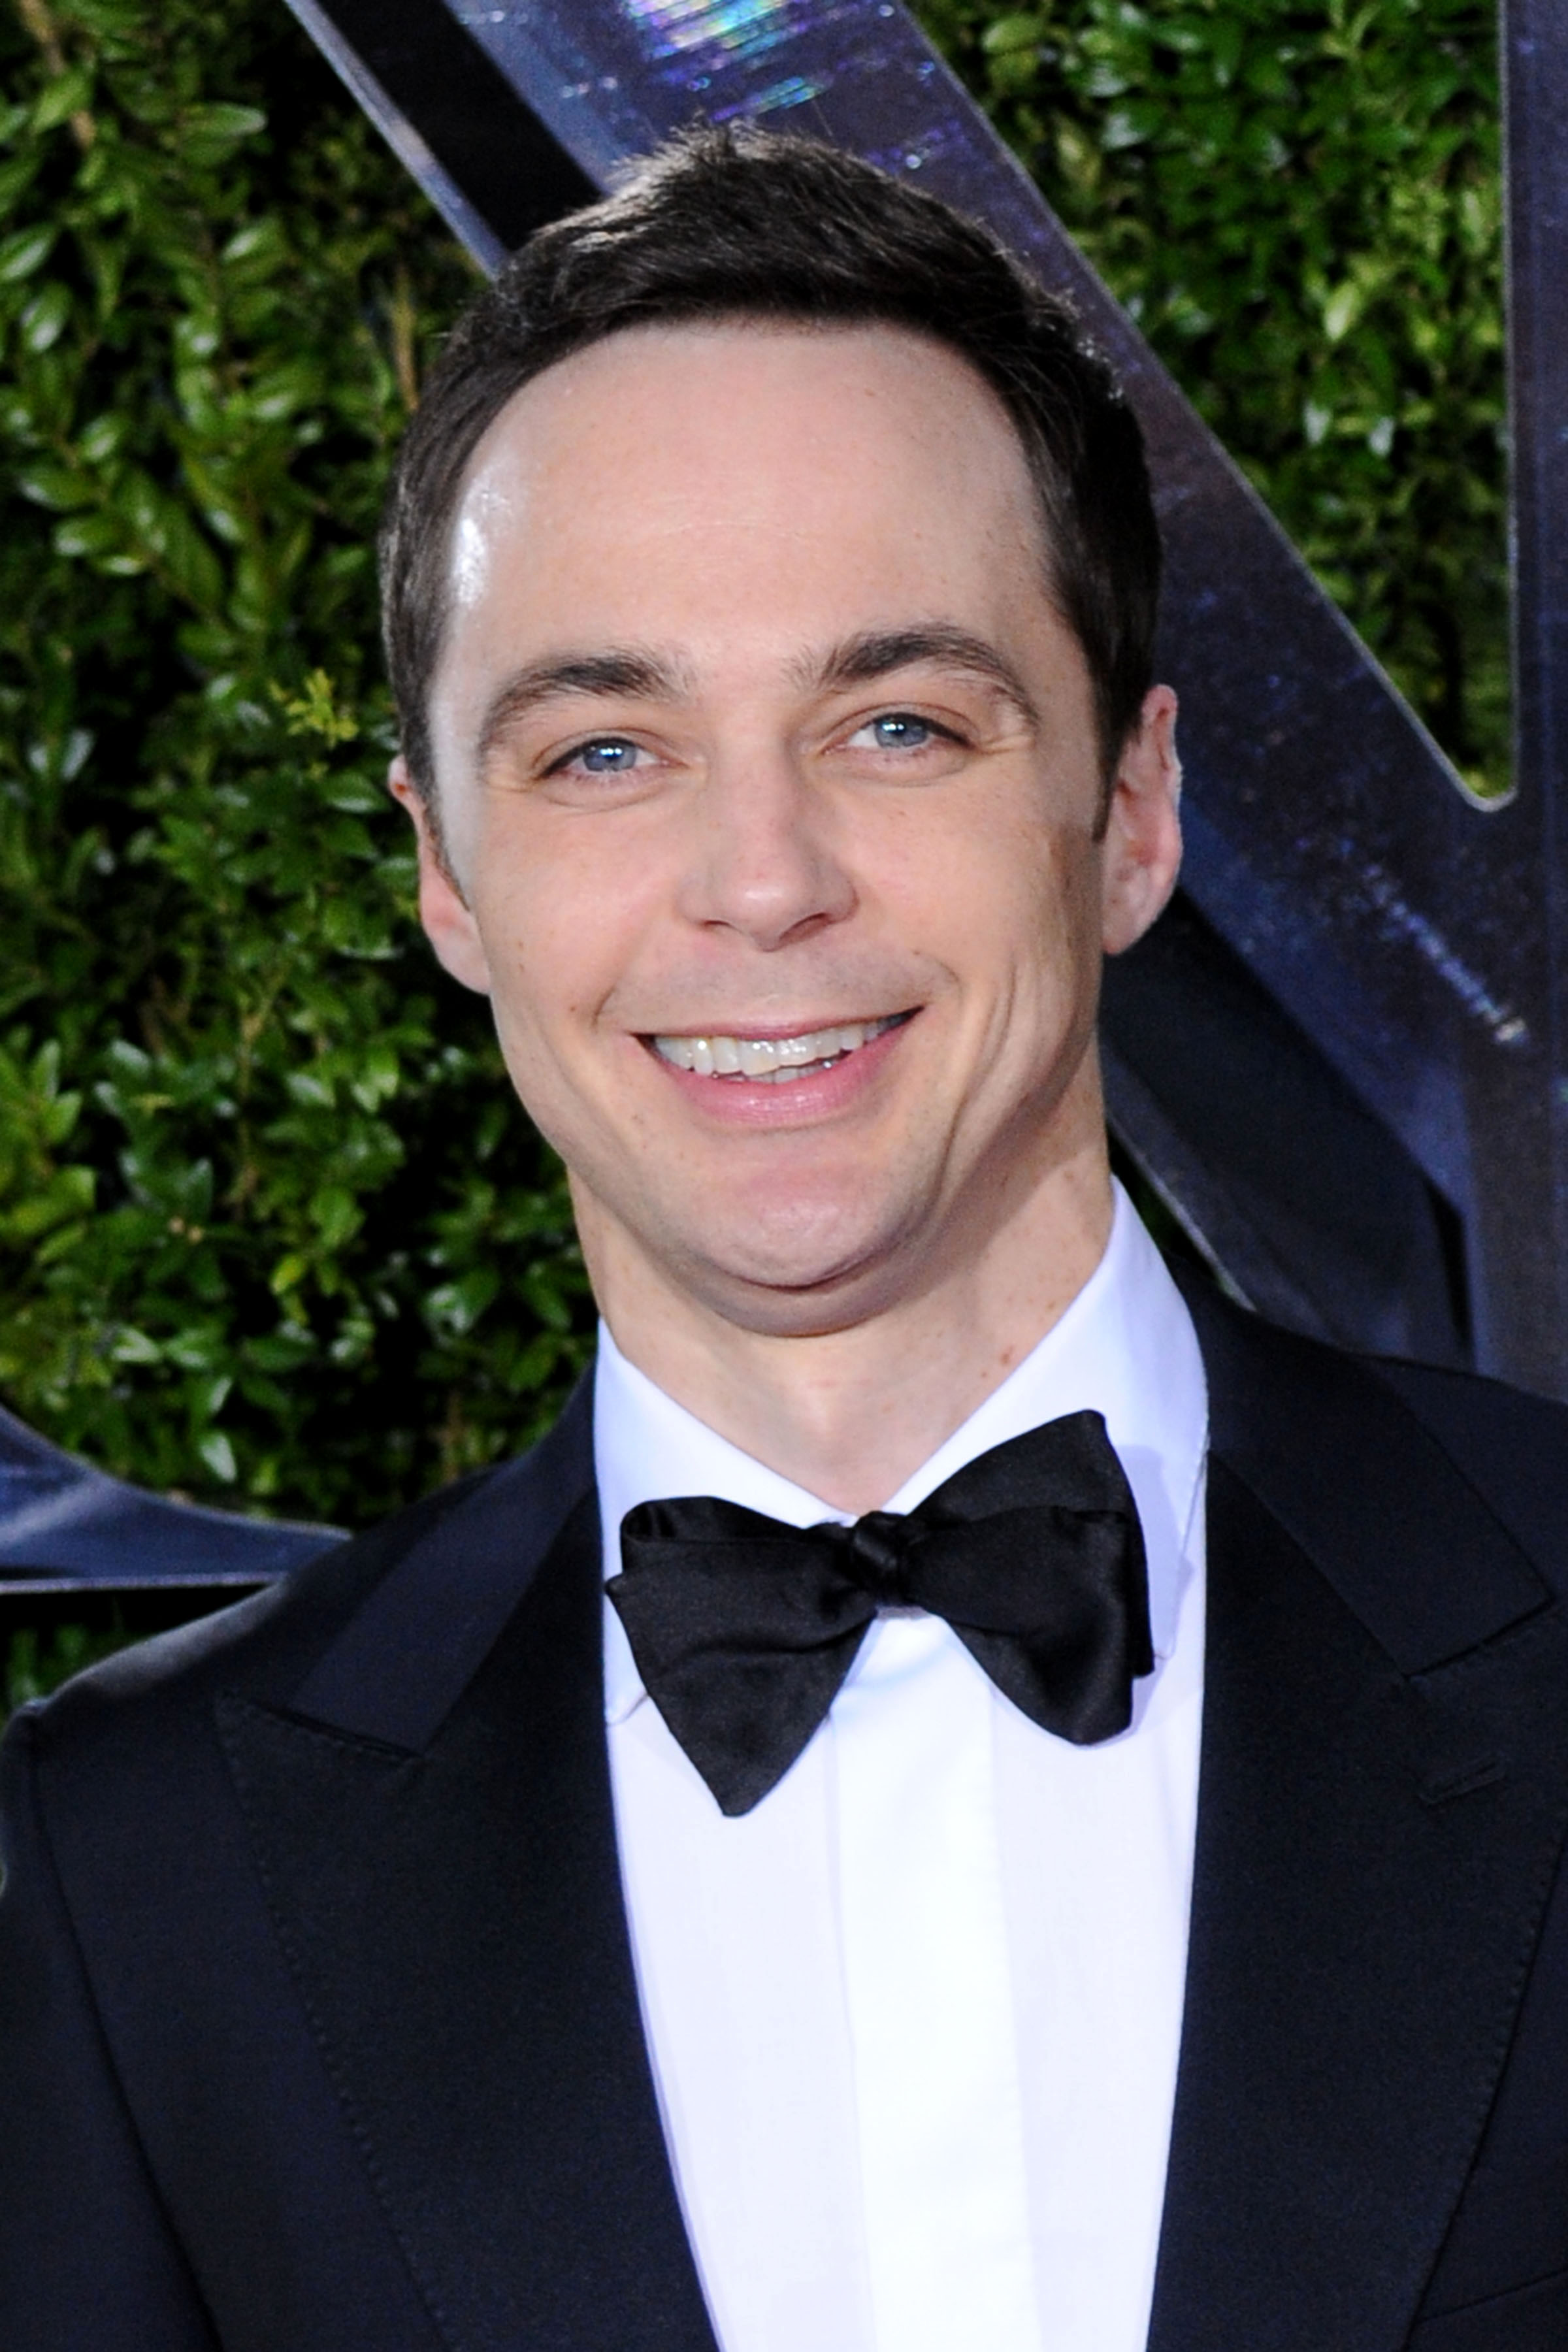 How tall is Jim Parsons?